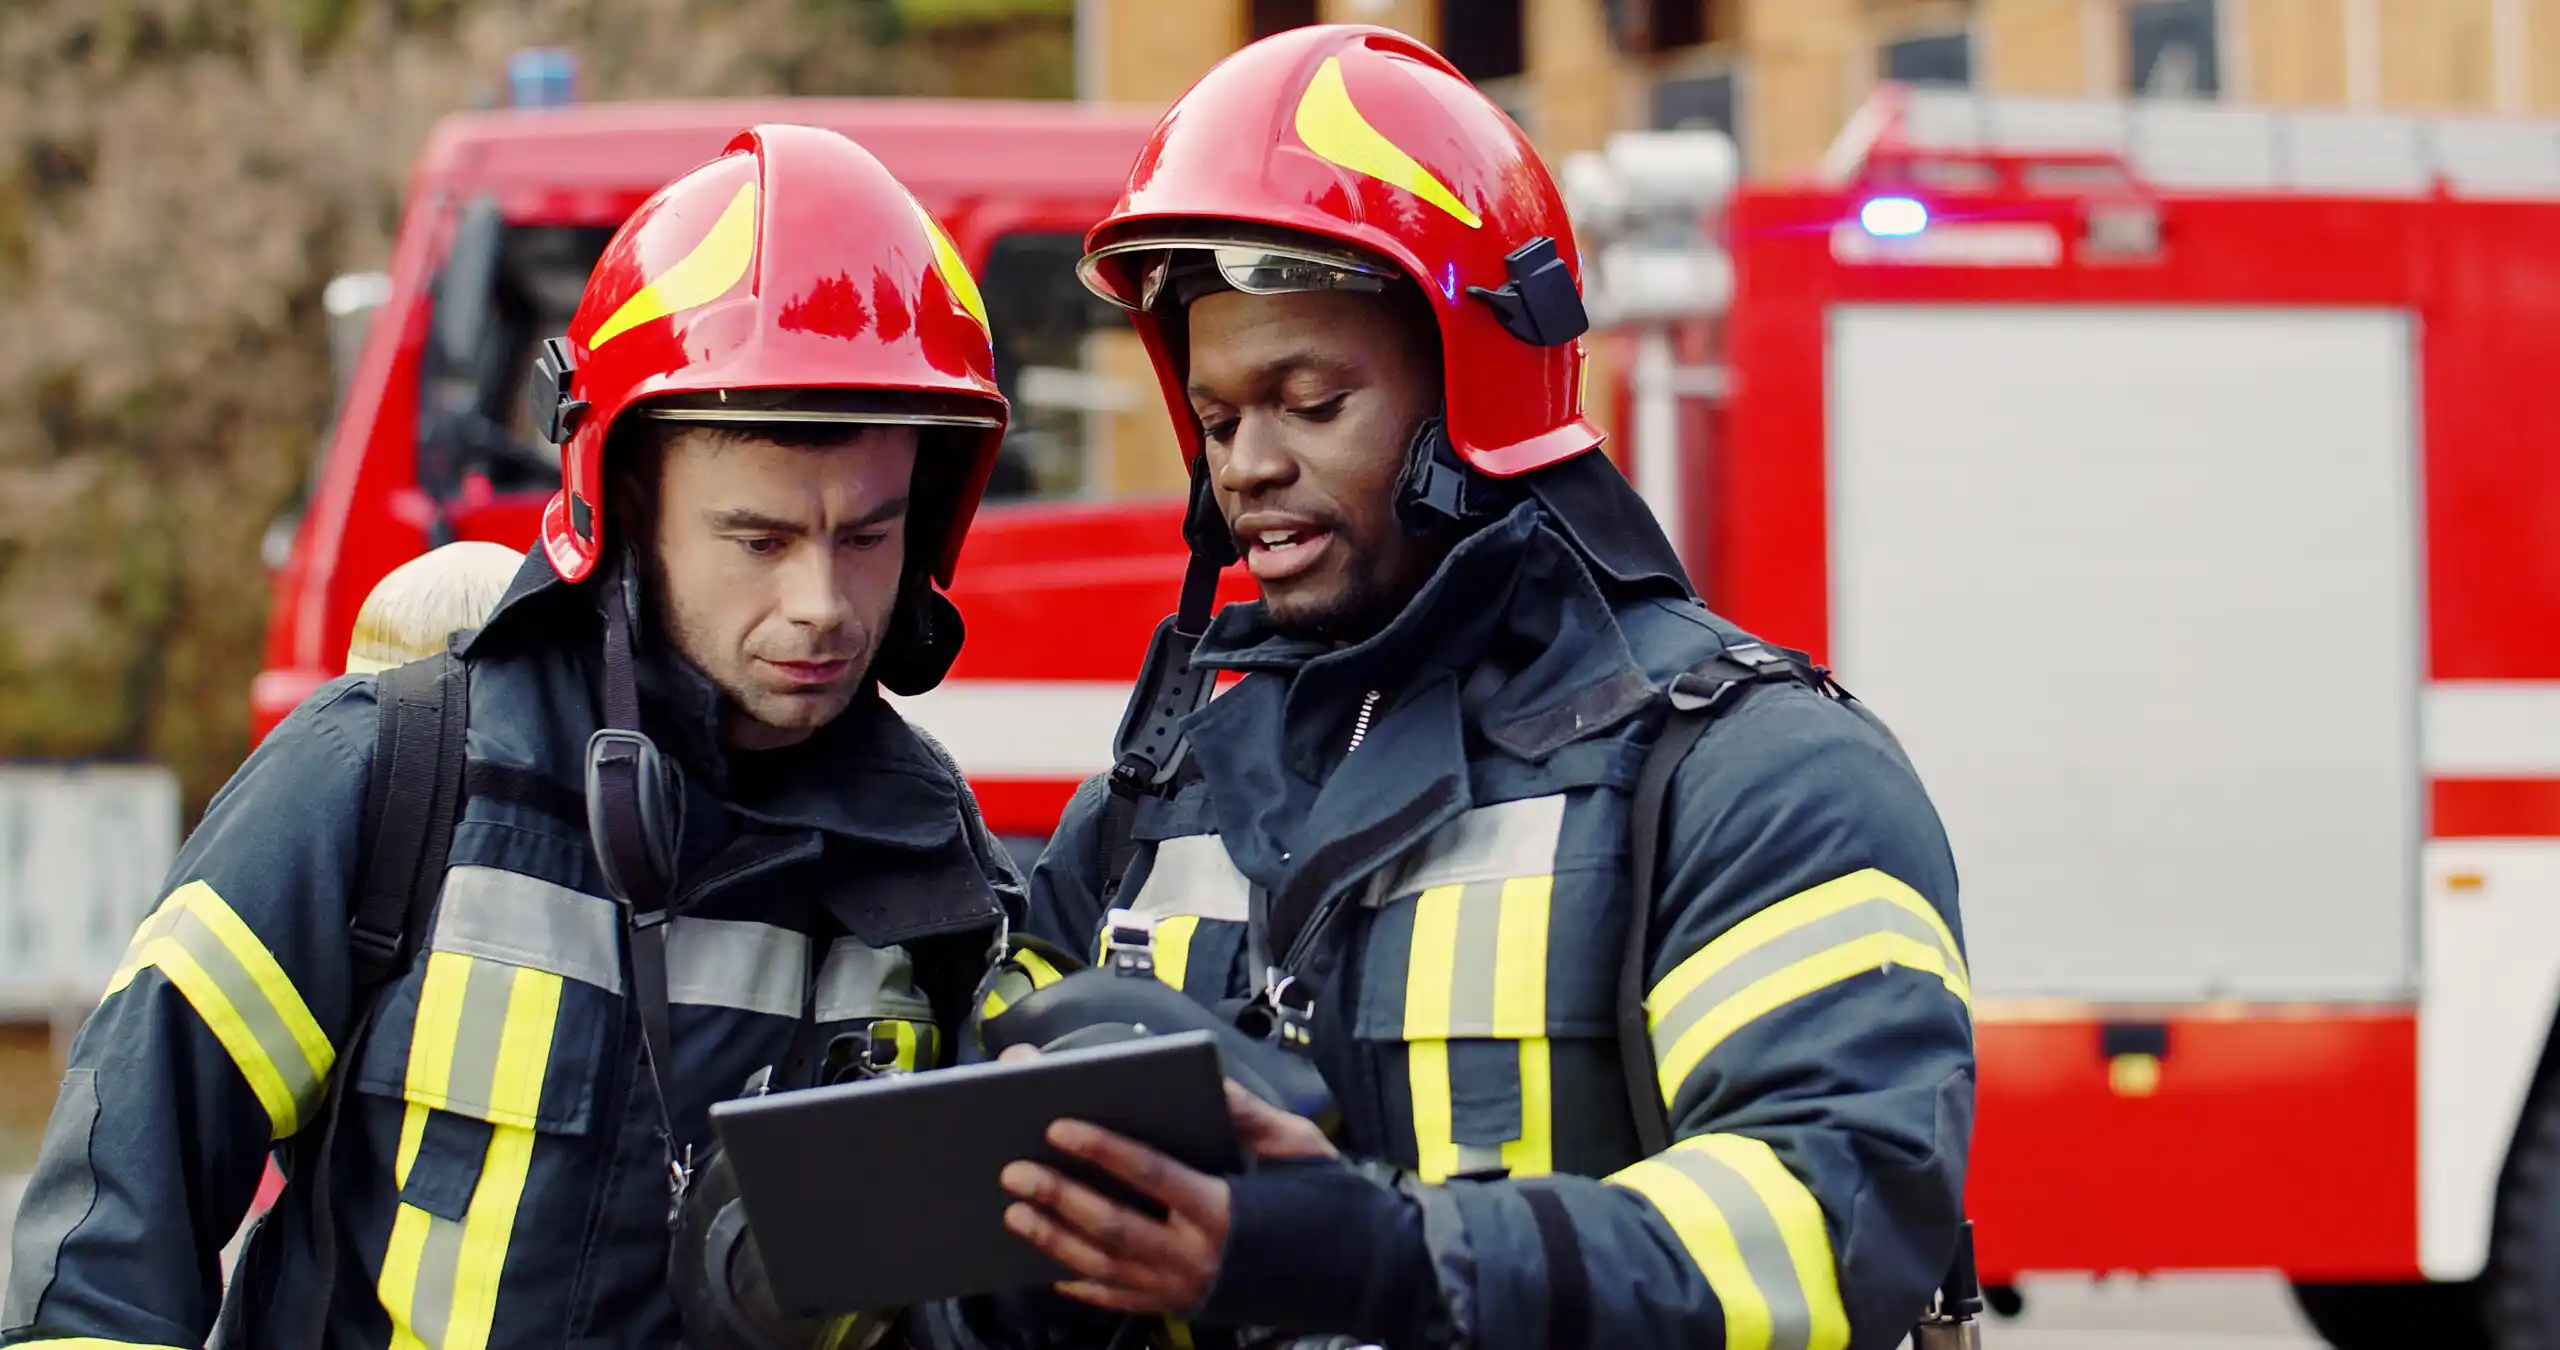 Firefighters planning their jobs